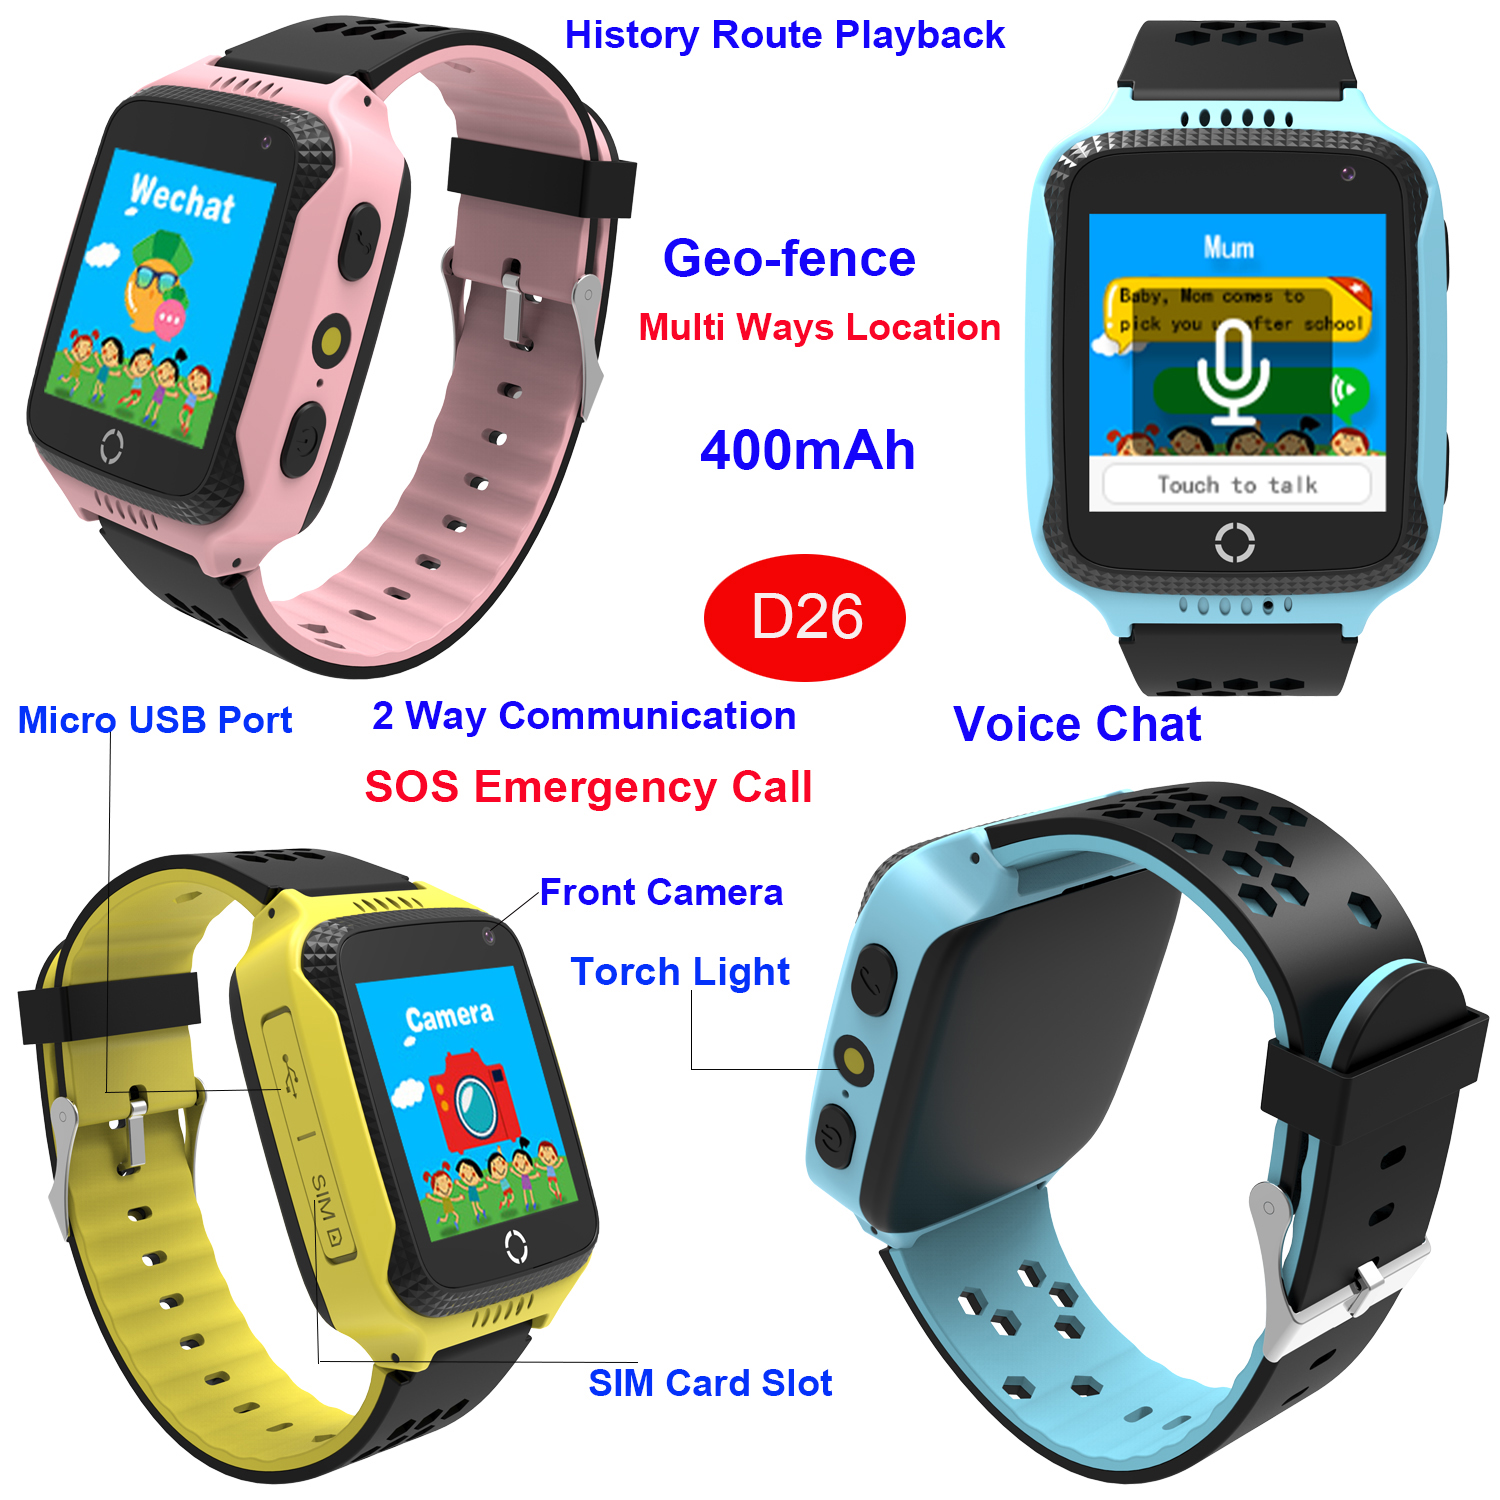 China manufacturer Christmas gift kids security parental control GPS Tracker Smart Watch with Camera and torch light (D26)